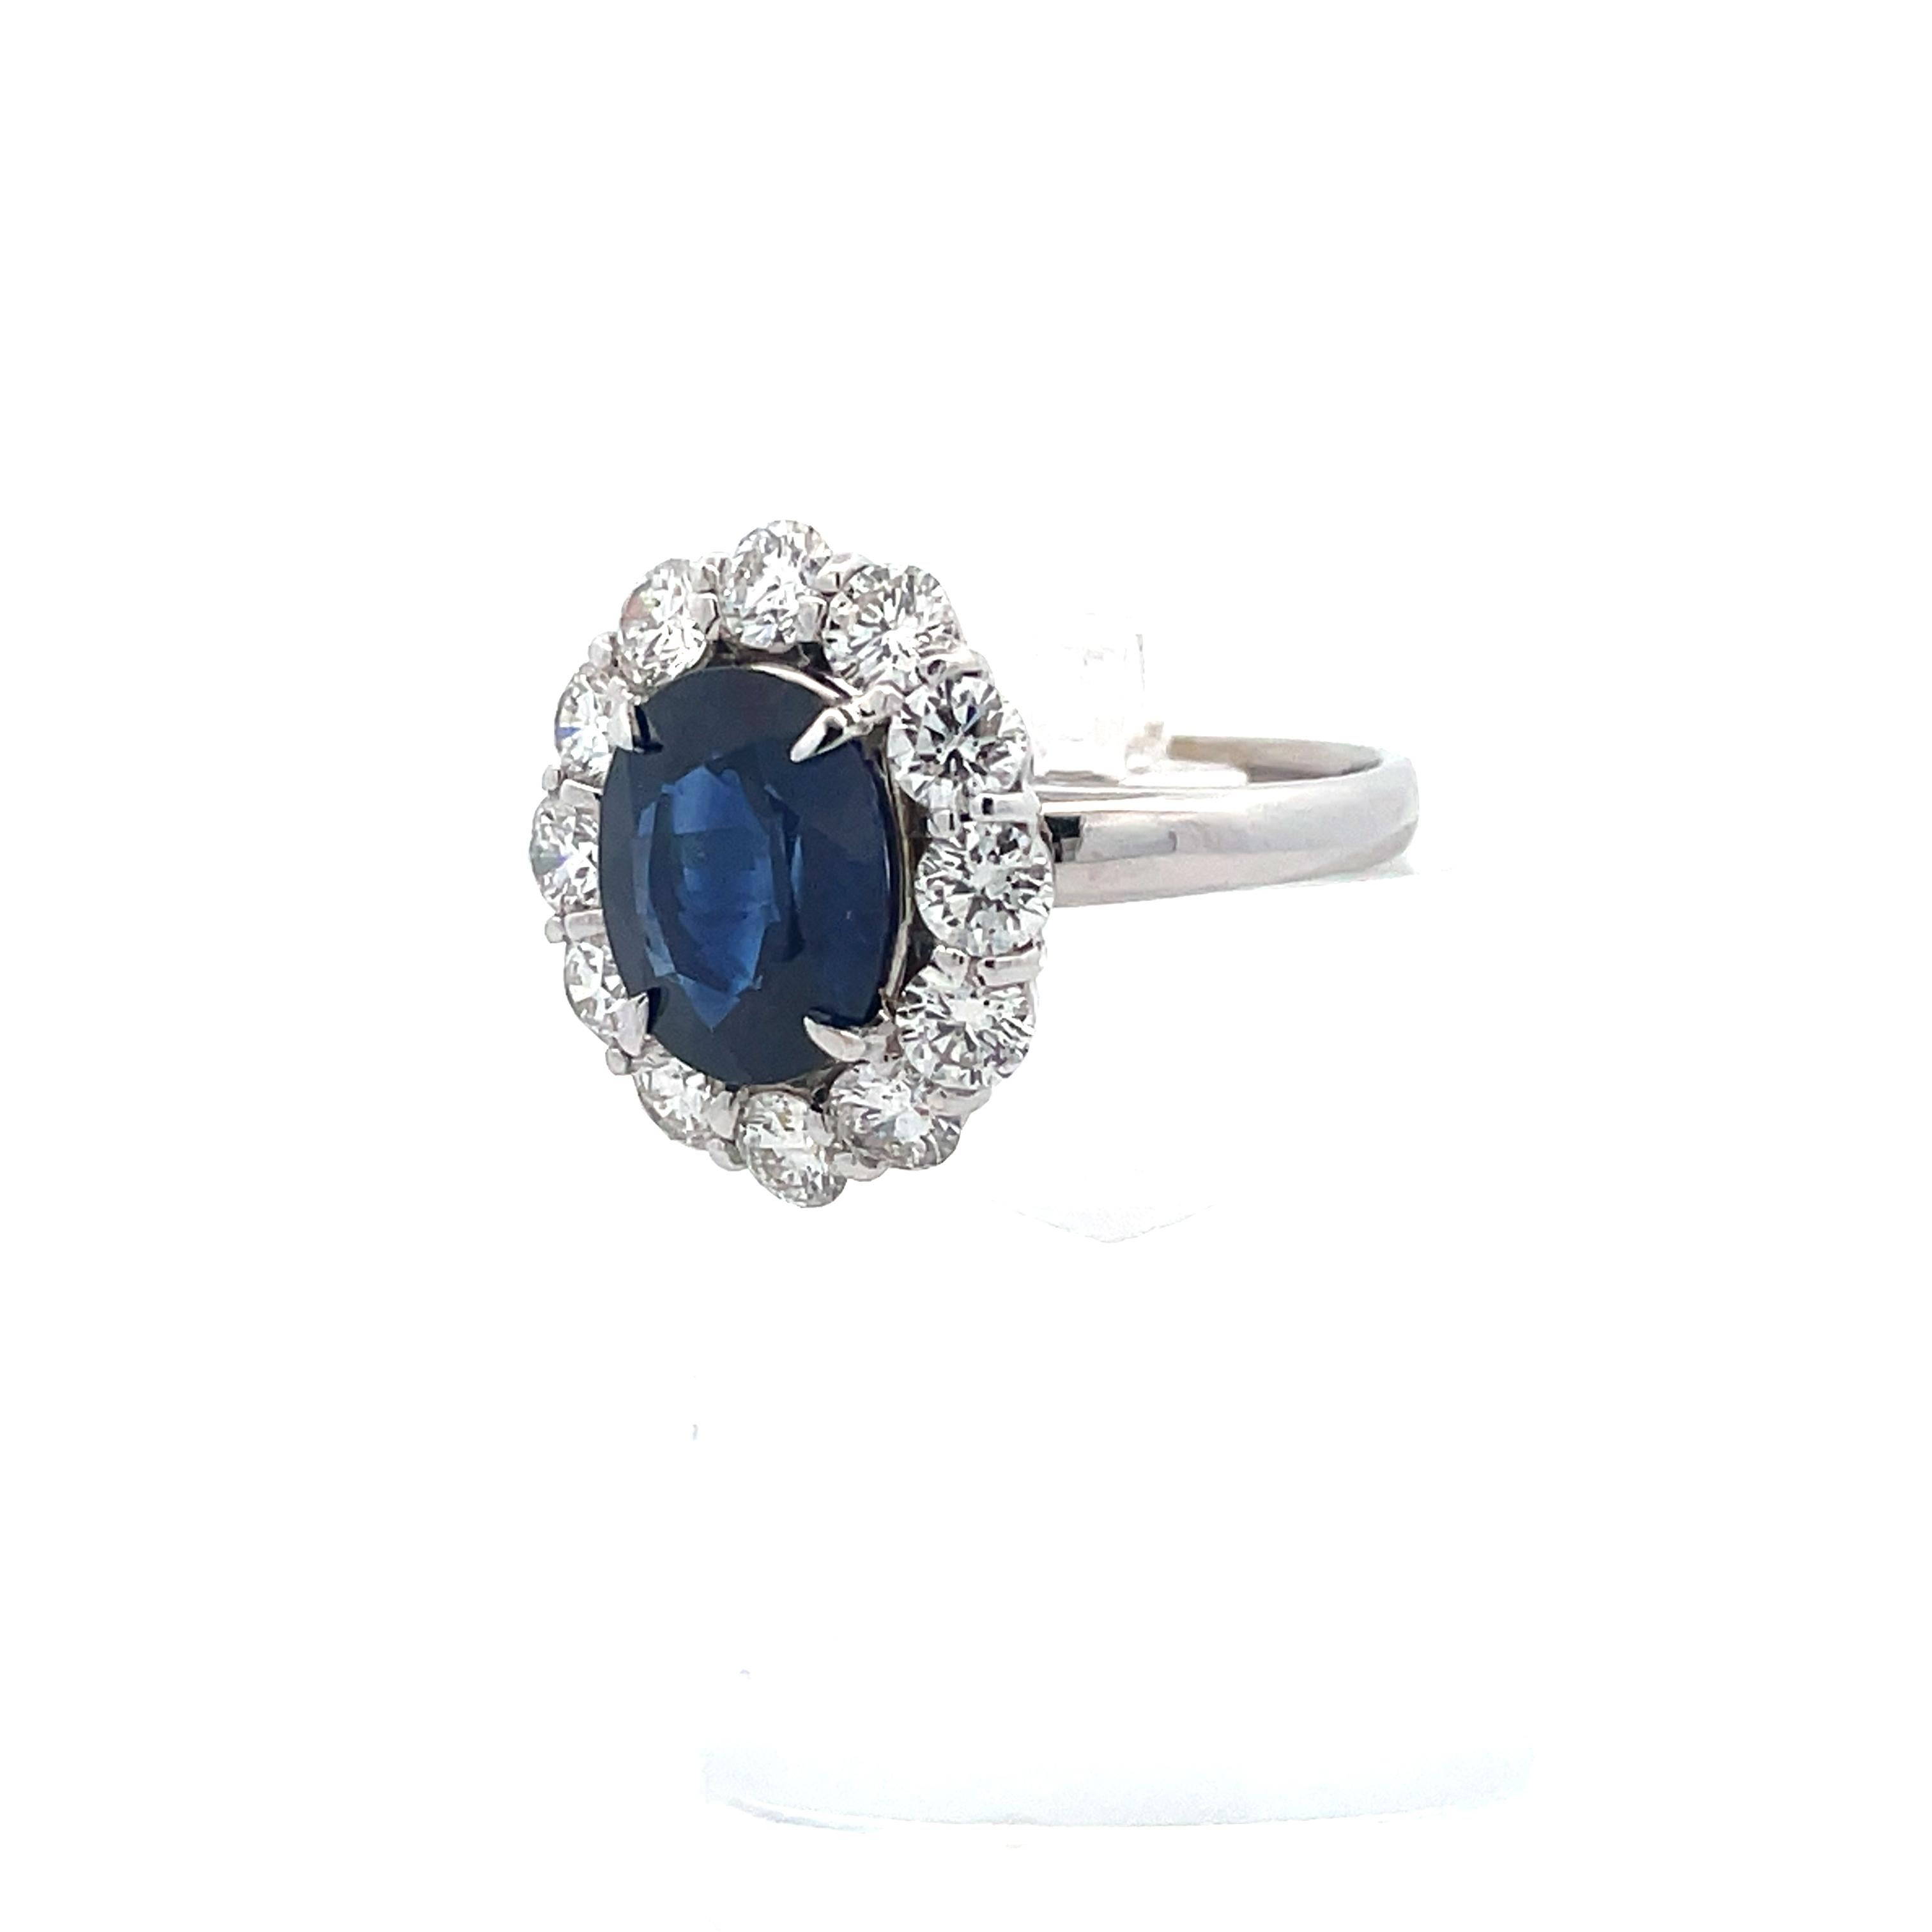  14K White Gold Contemporary Lady Di Ring Blue Sapphire and Diamond  For Sale 2